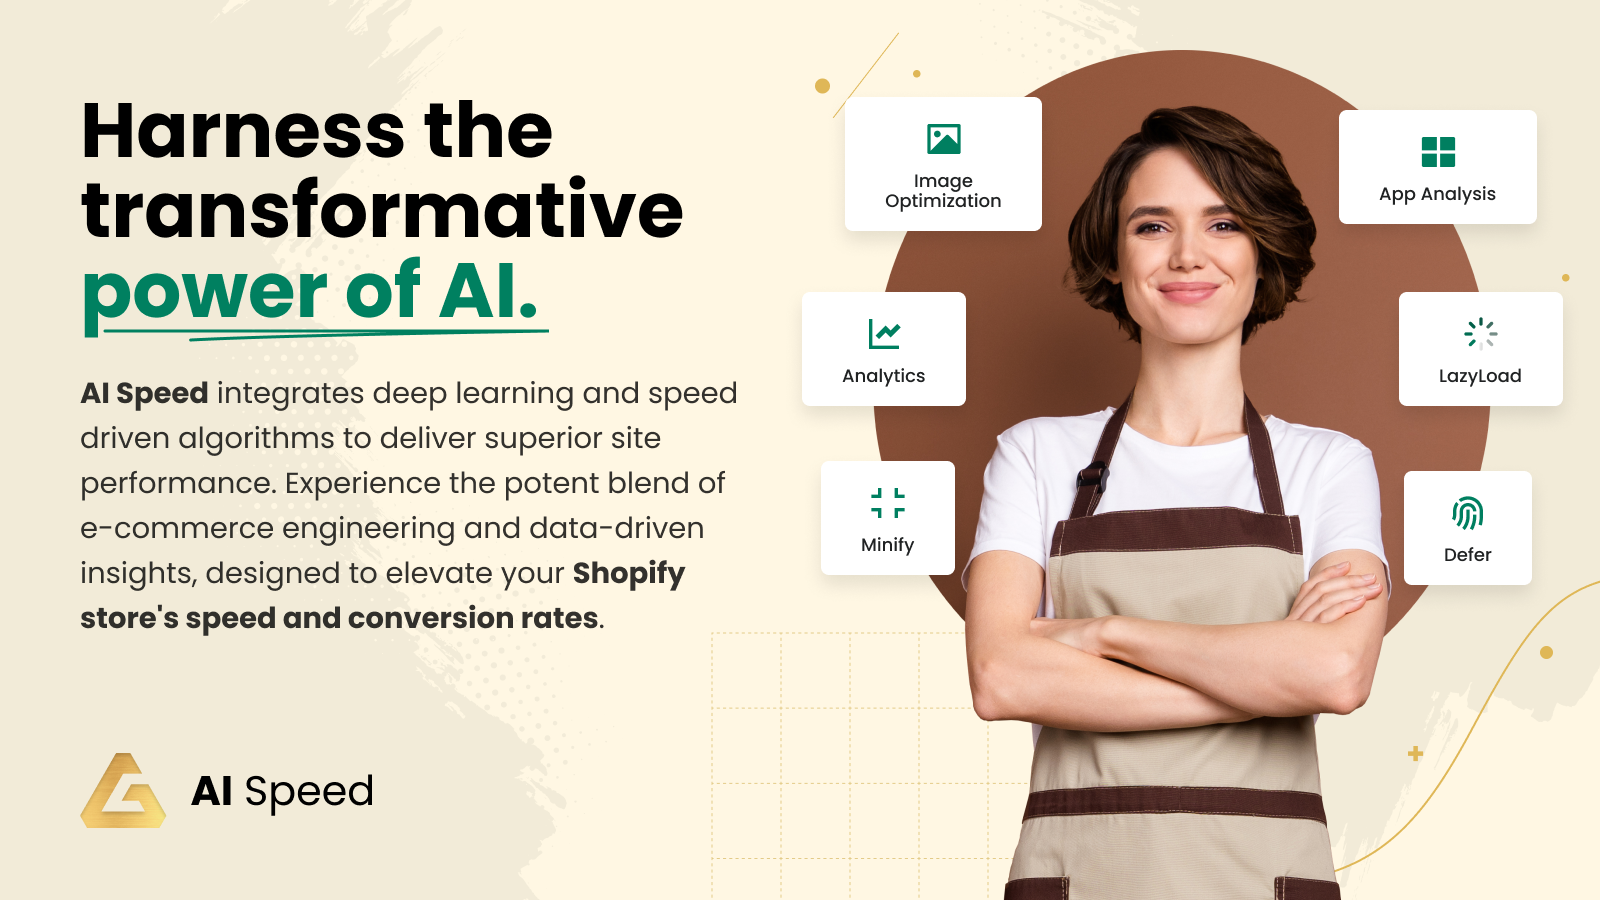 Harness the transformative power of AI